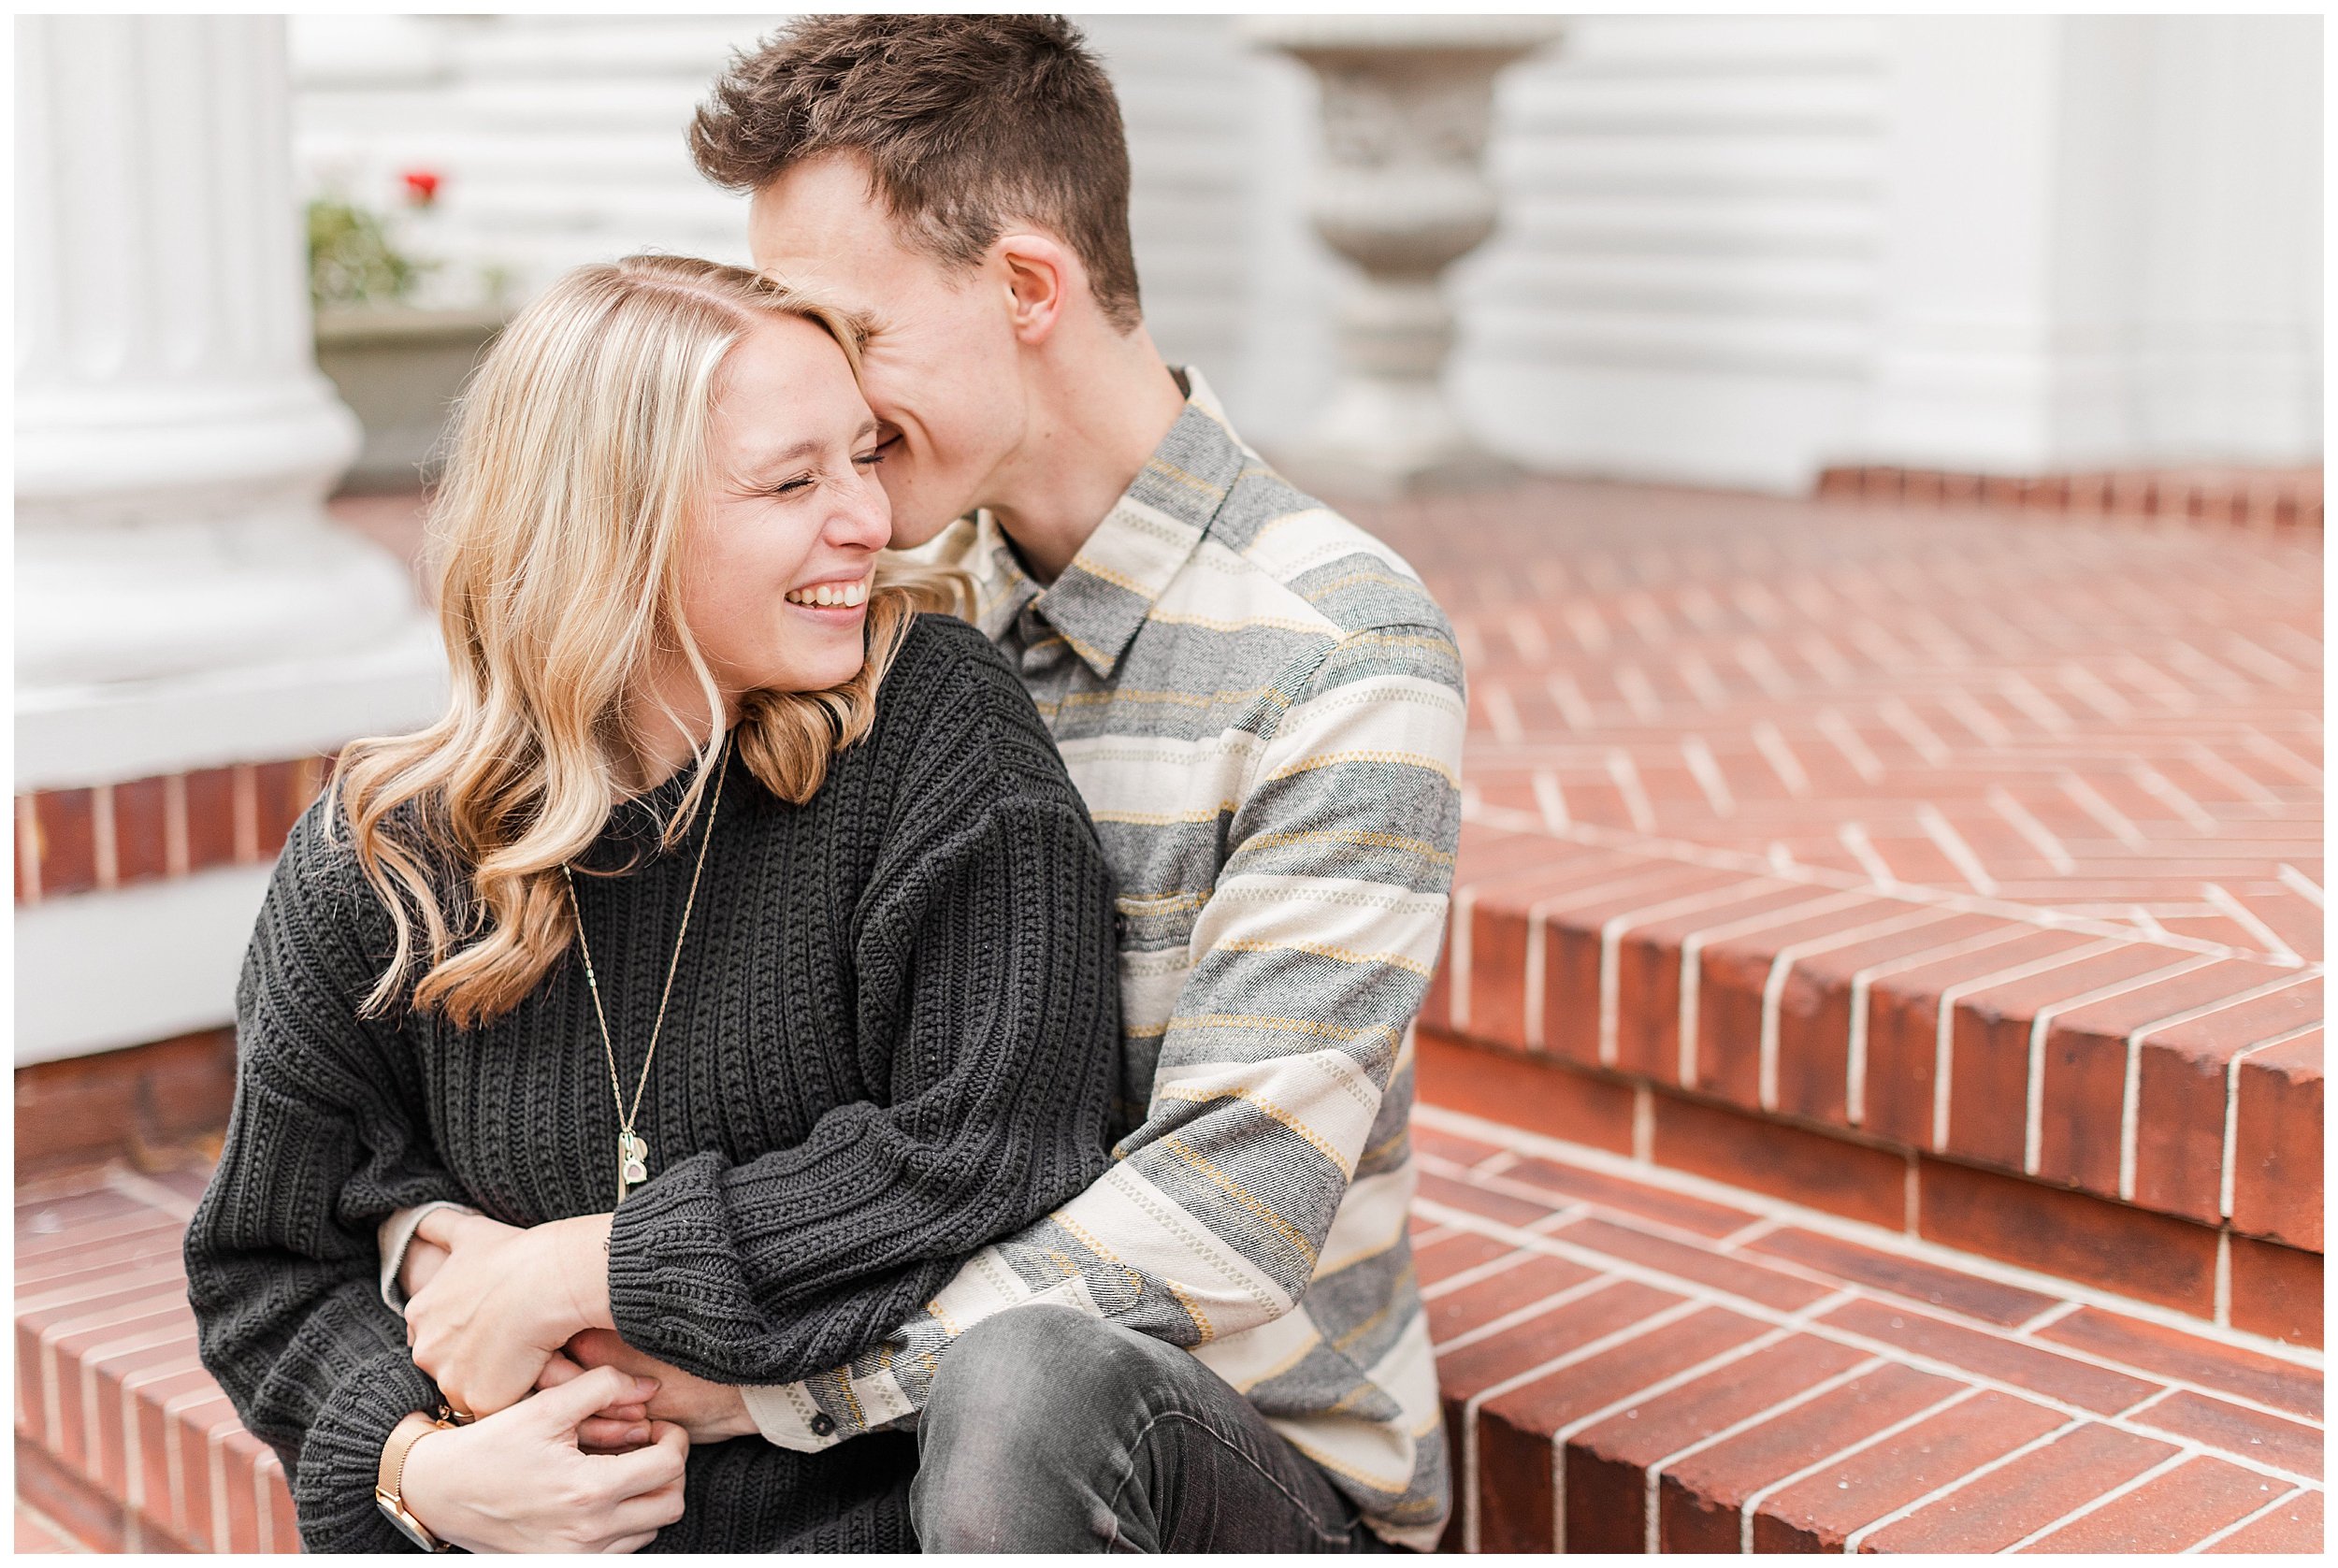 wilmington riverwalk and historic district engagement session ashley christ photography wilmington wedding photographer_0061.jpg